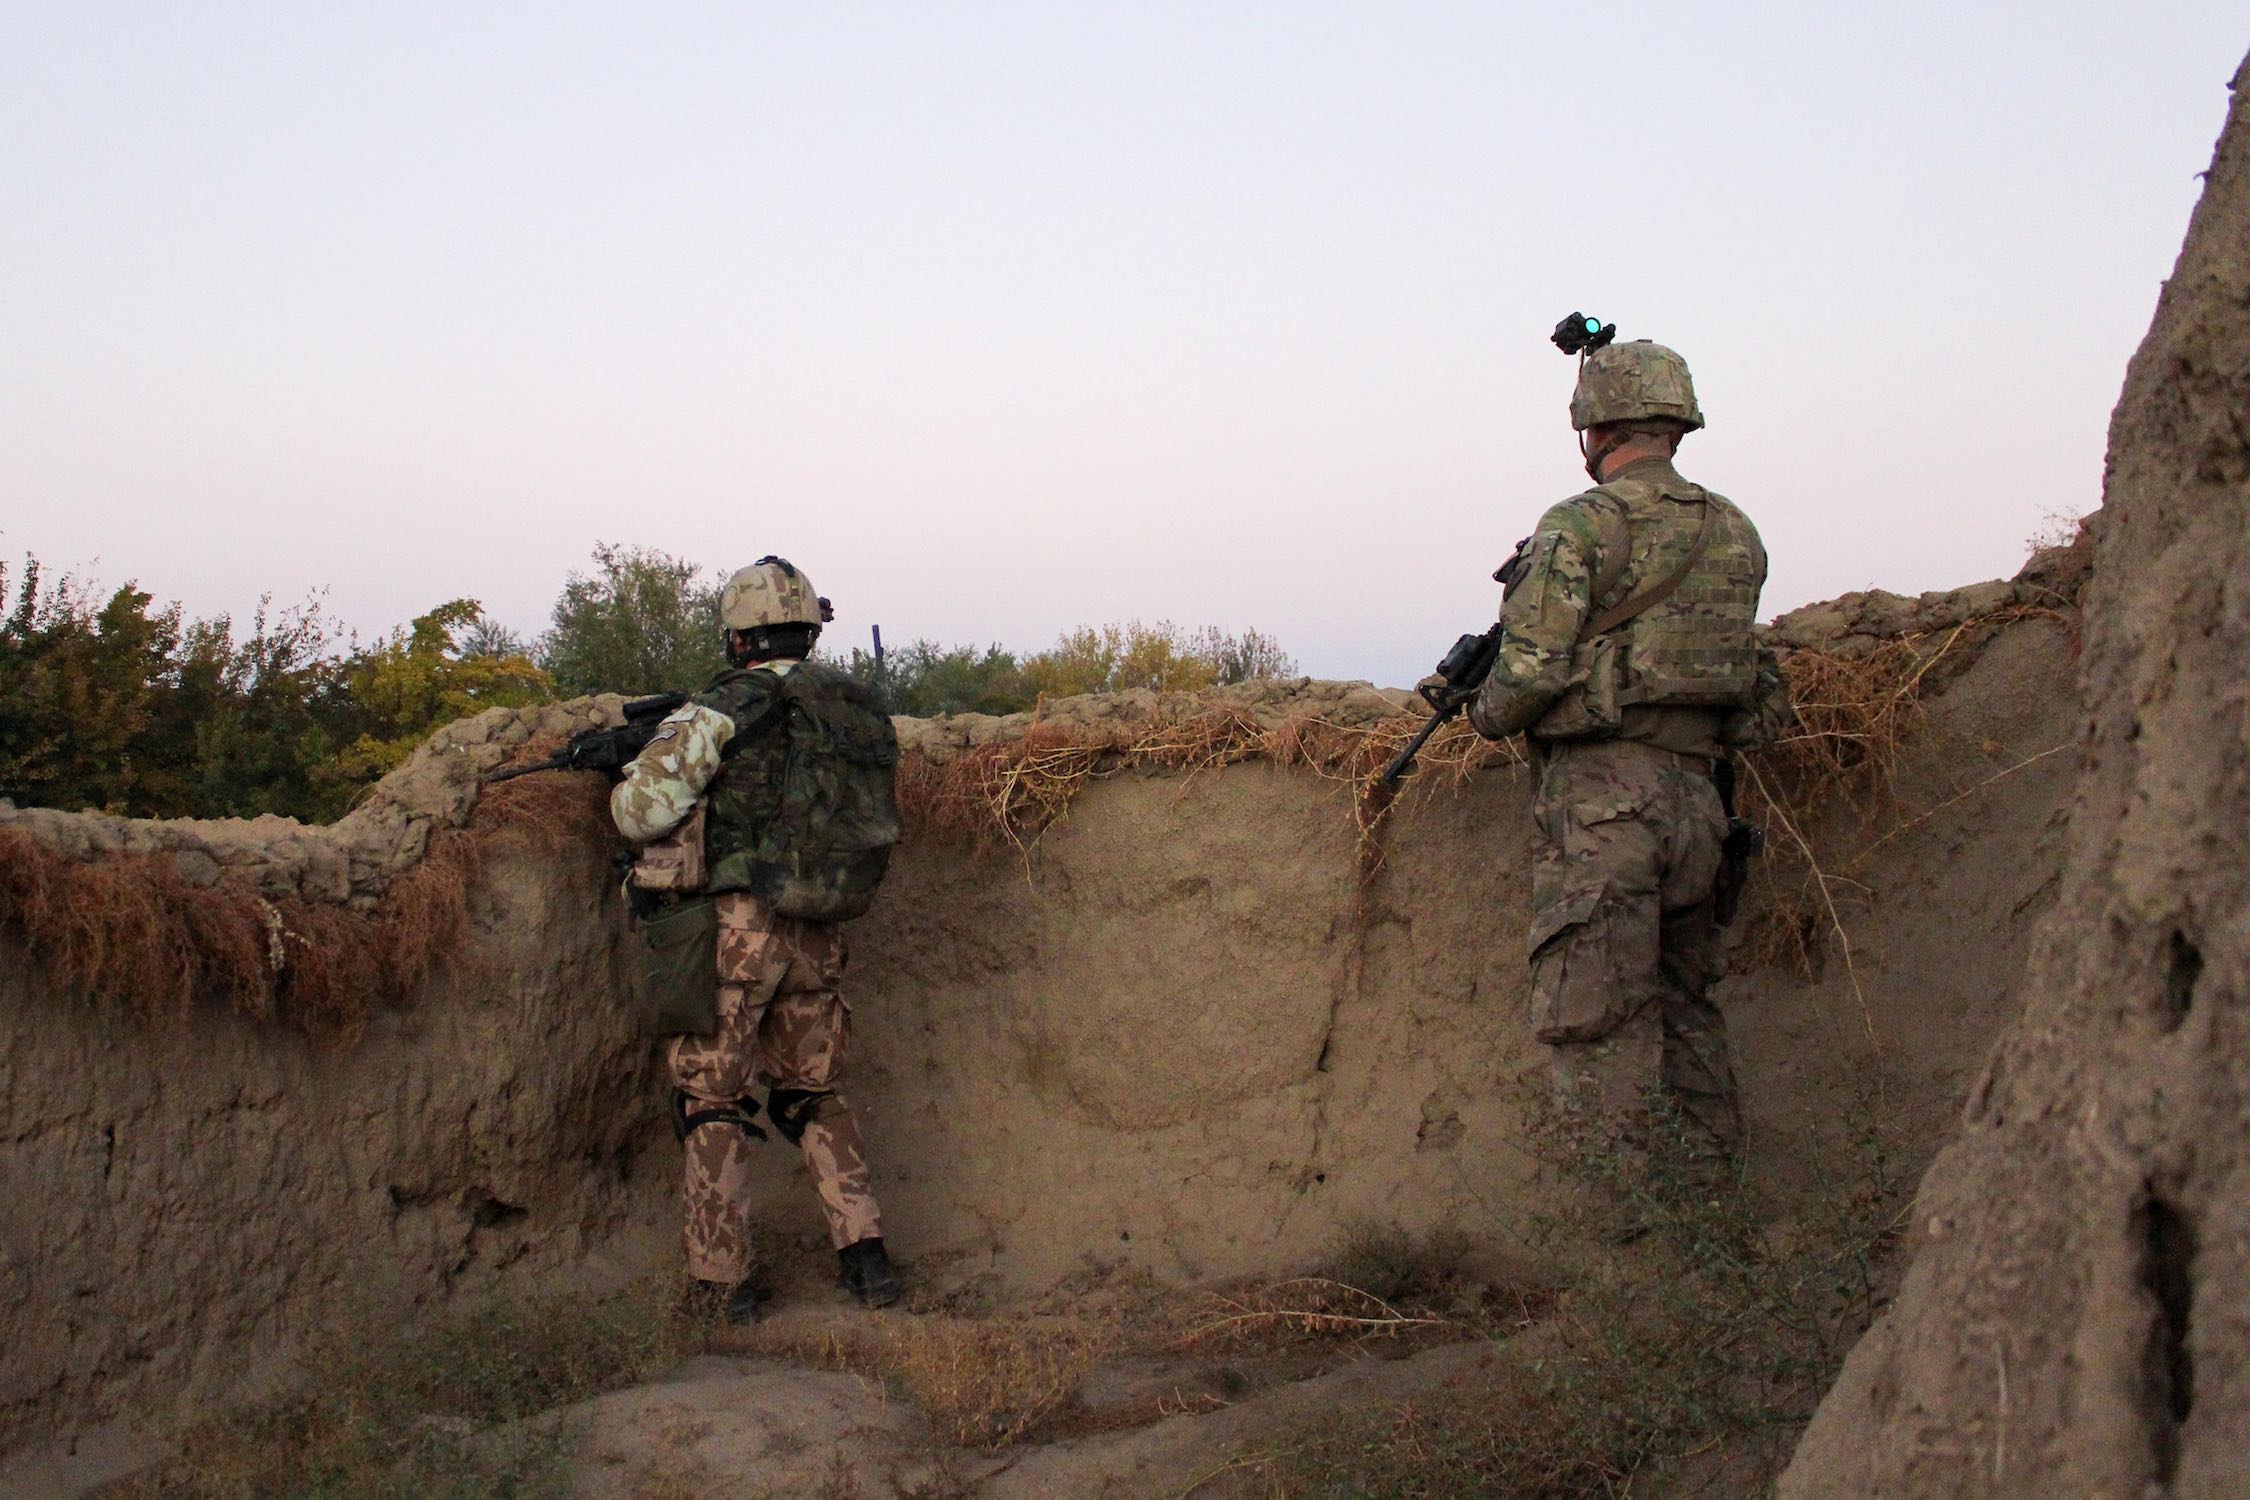 Czech and US soldiers in Afghanistan's Parwan province